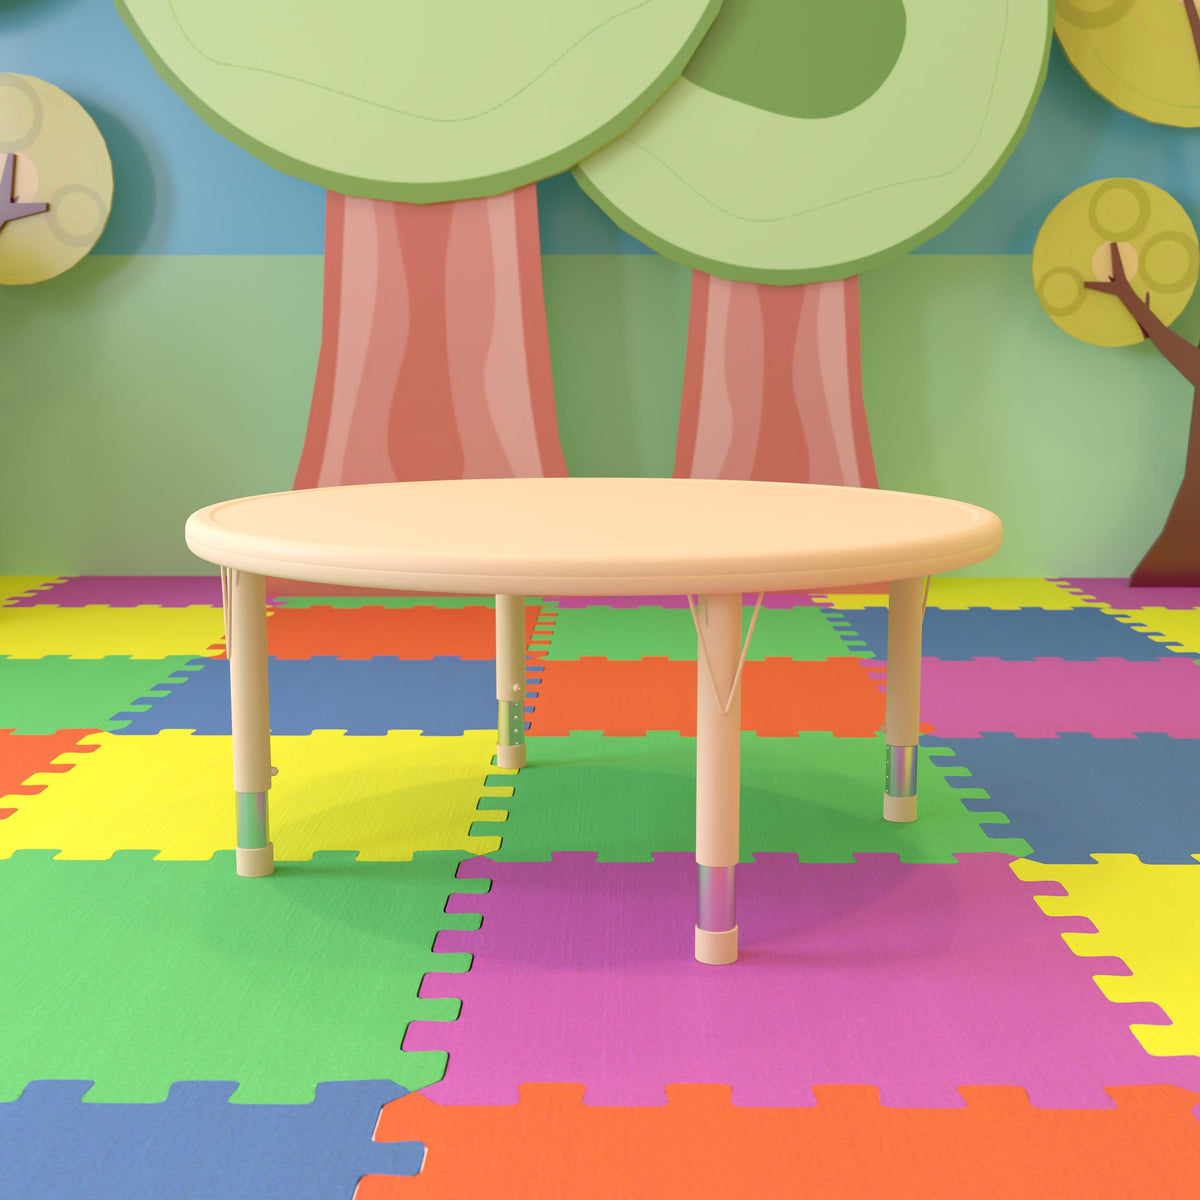 Natural |#| 45inch Round Natural Plastic Height Adjustable Activity Table - School Table for 4